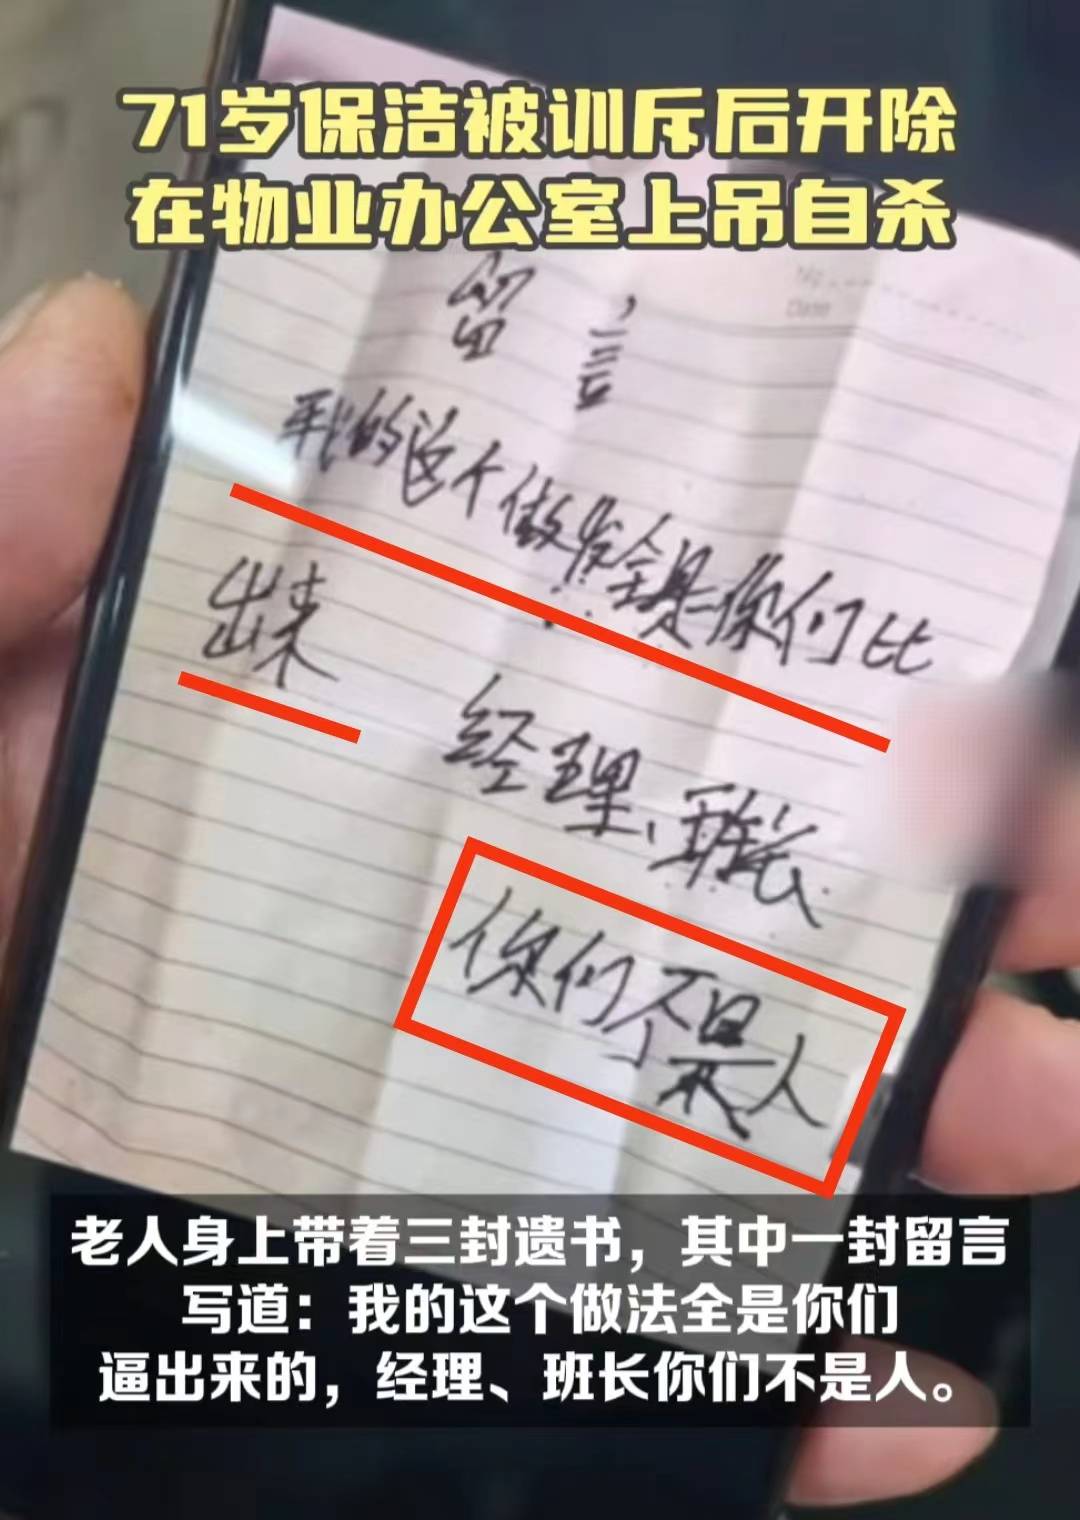 71After being reprimanded and fired, the janitor committed suicide by hanging himself！Property only claims compensation1Ten thousand yuan，the dead3Disclosure of the posthumous letter